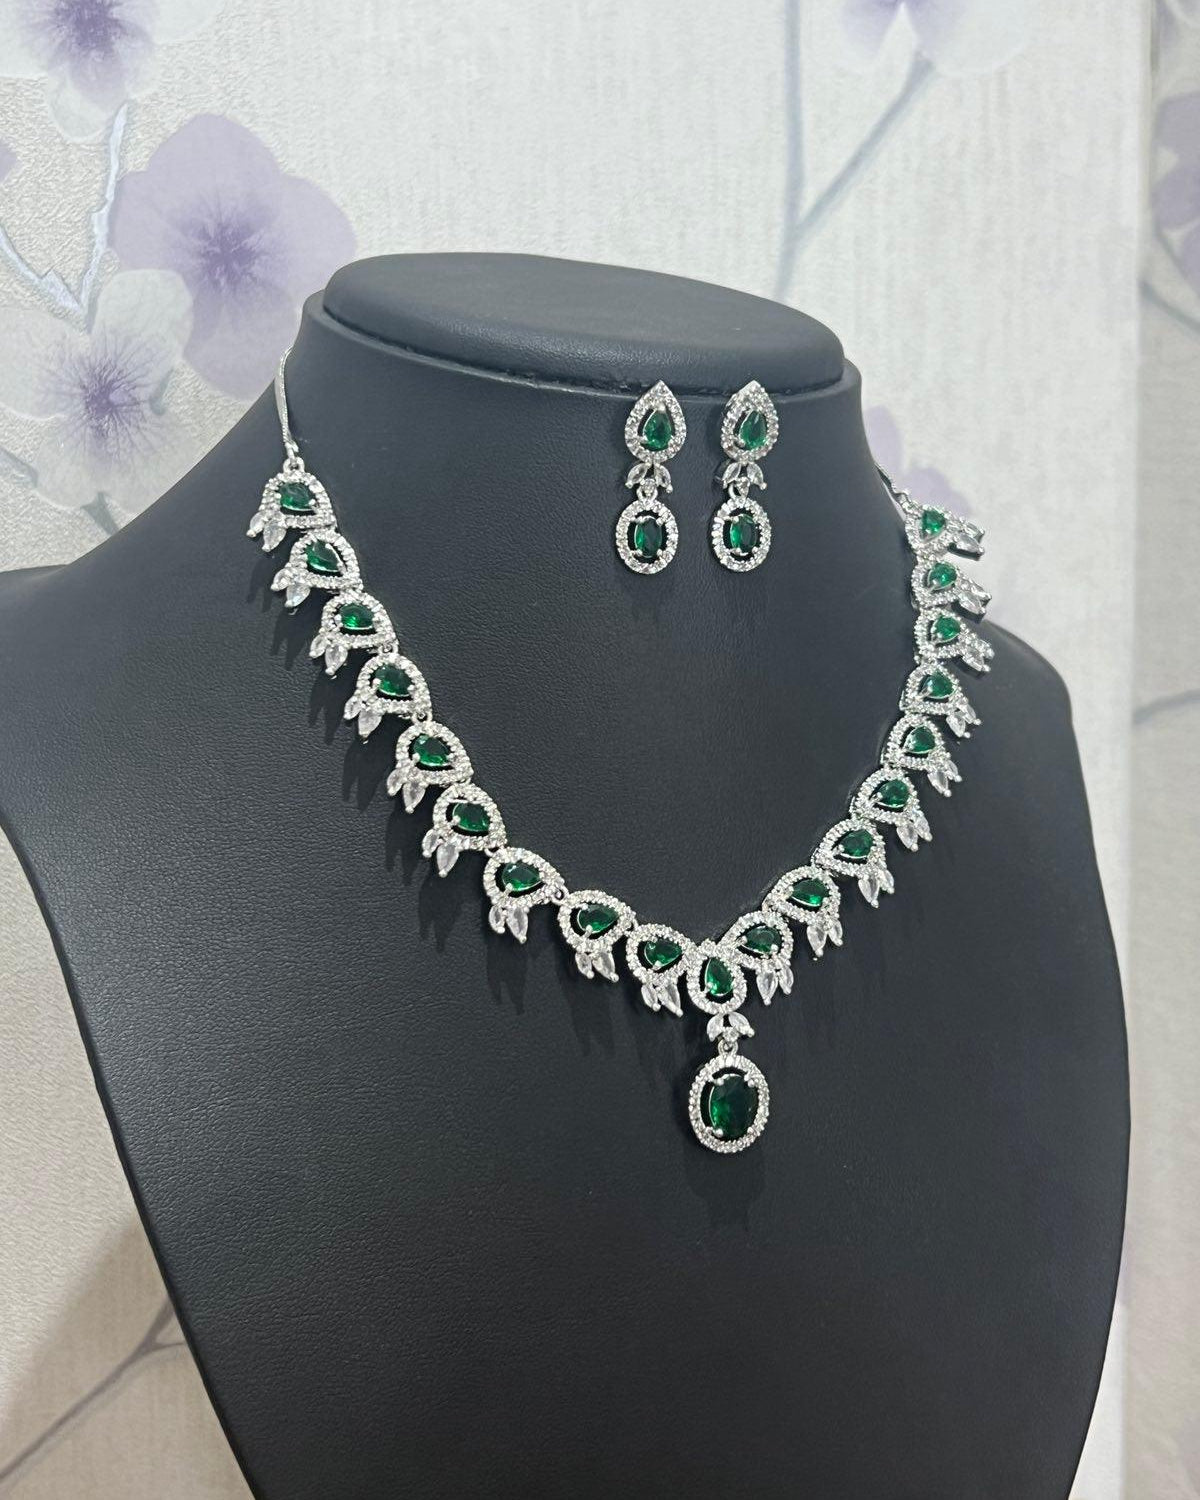 American Diamond Necklace with Green Stone - Boutique Nepal